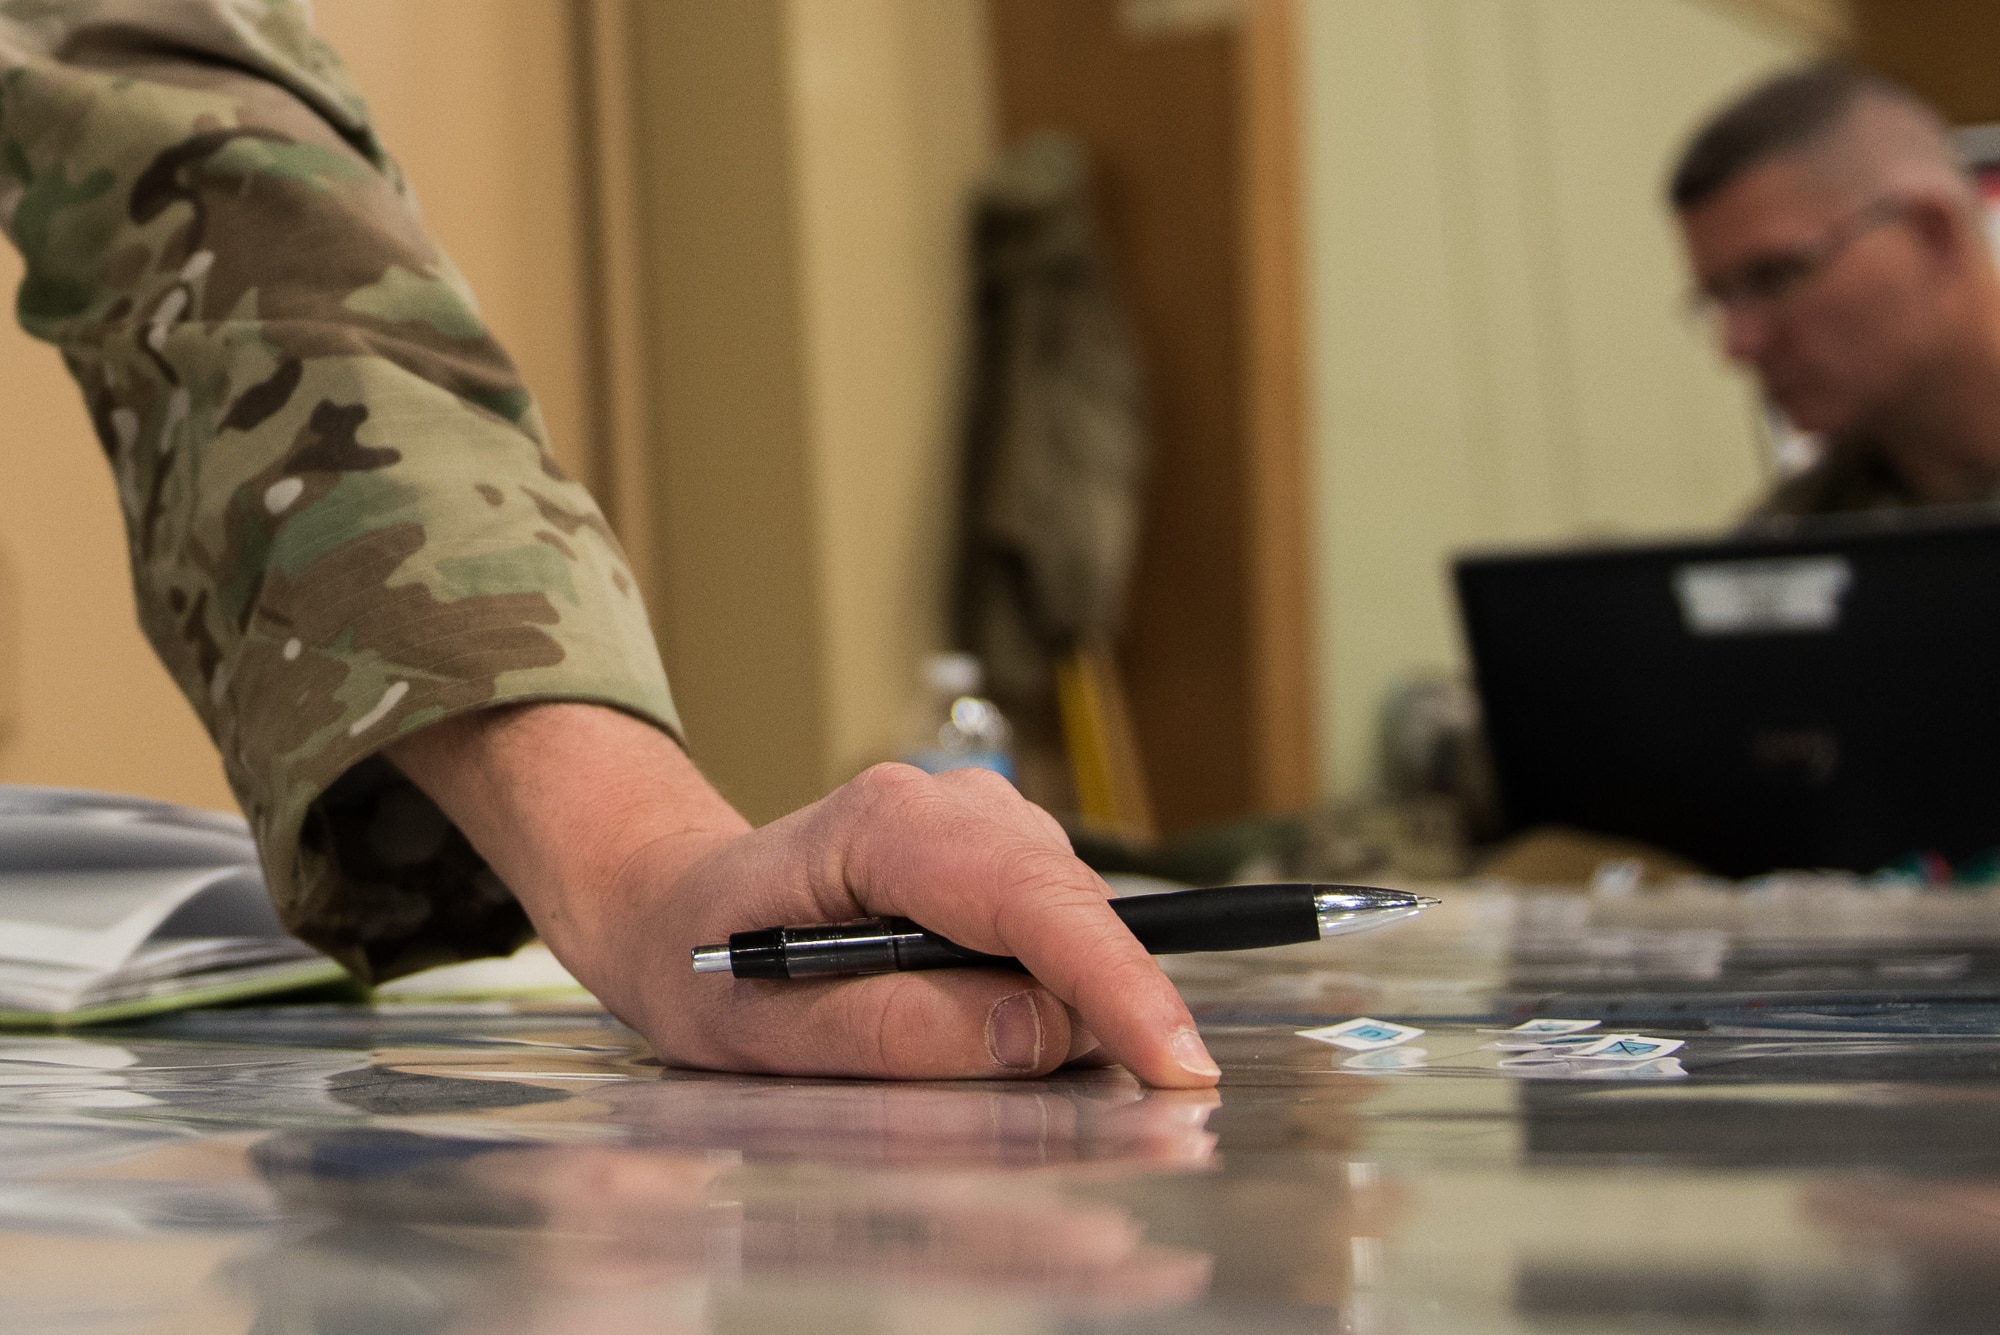 Lt. Col. Matthew Emerson, director of operations for the 146th Air Support Operations Squadron (146th ASOS), Oklahoma Air National Guard, points out a grid coordinate on a map as he plots an airstrike during the 19-05 Command Post Exercise (CPX) for the Minnesota Army National Guard Armored Brigade Combat Team, 34th Infantry Division (1/34th ABCT), March 8-9, 2019, at Camp Ripley in Little Falls, Minn. The CPX was a practice virtual battle exercise for the brigade to practice their battle drills, and the 146th ASOS will continue partnering with the 1/34th ABCT later in the year to assist in a graded warfighter exercise, as well as other trainings next year. (U.S. Air National Guard photo by Staff Sgt. Brigette Waltermire)